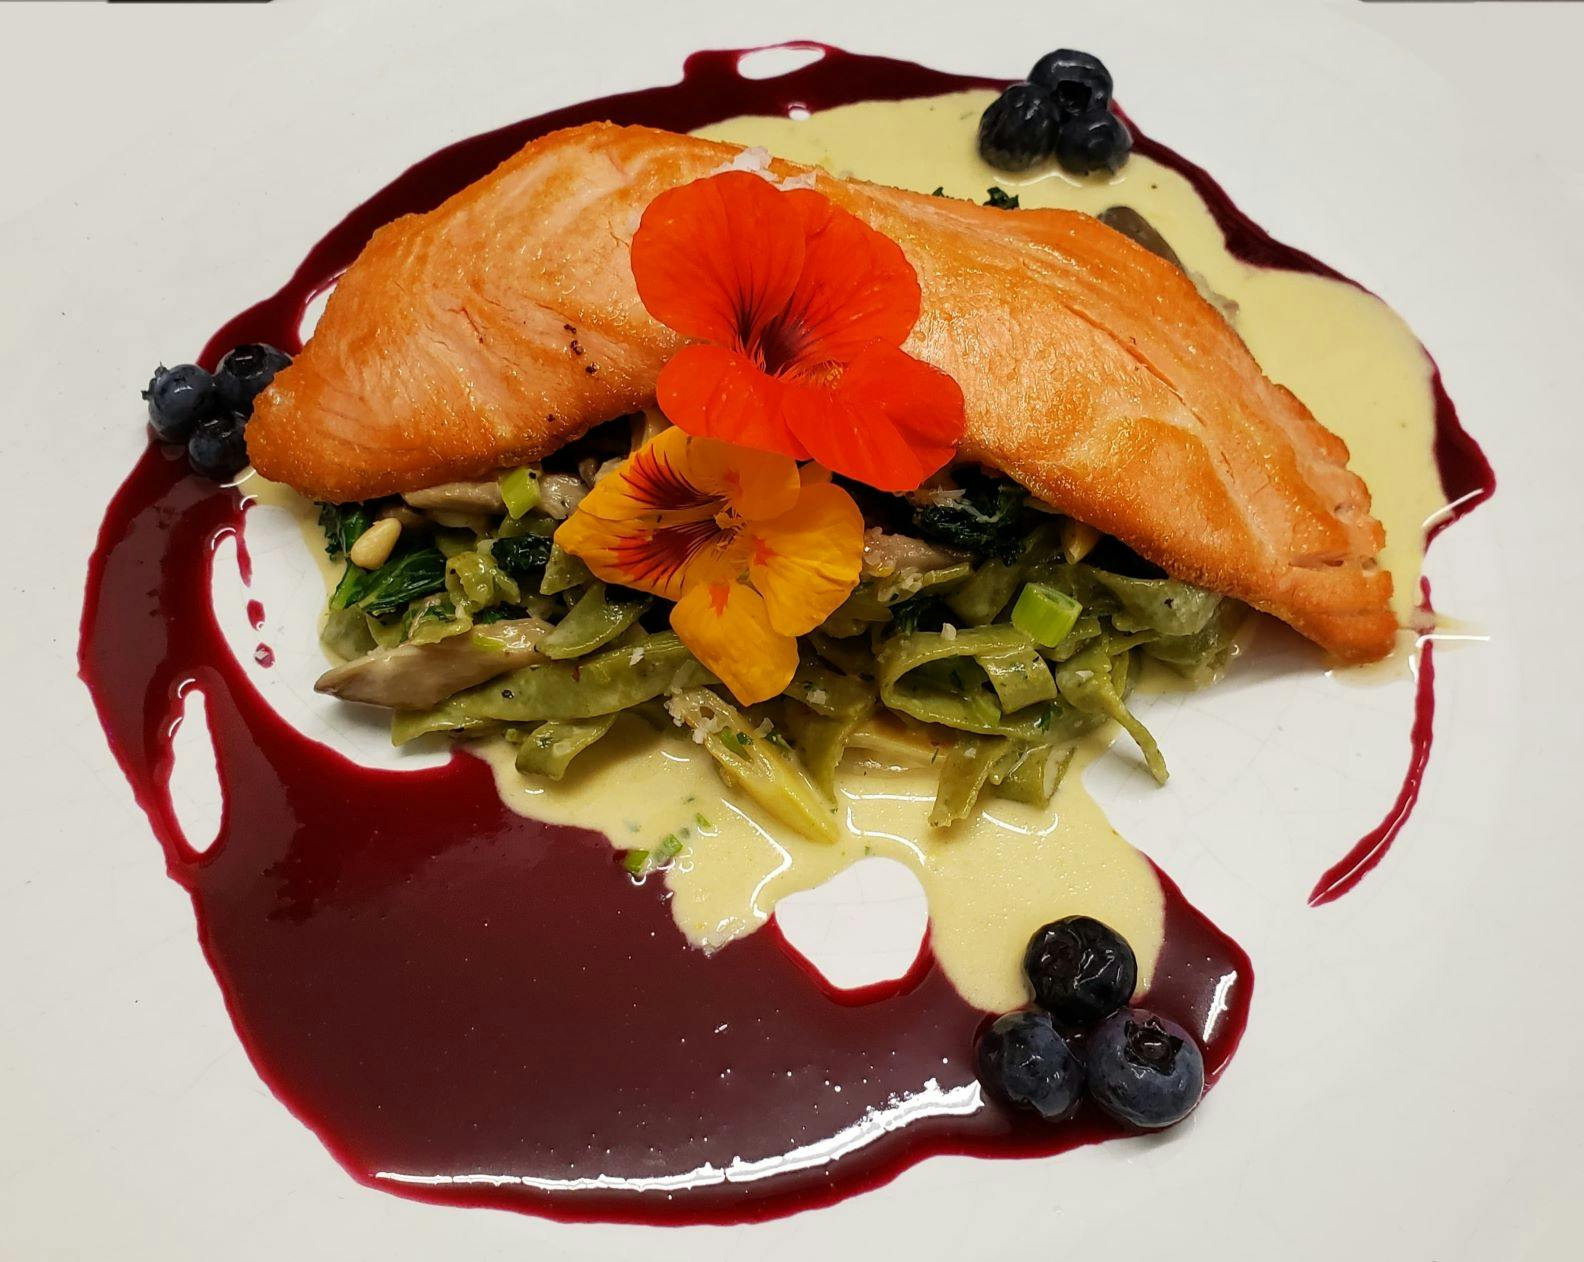 neah bay salmon with bluebeery beurre blanc